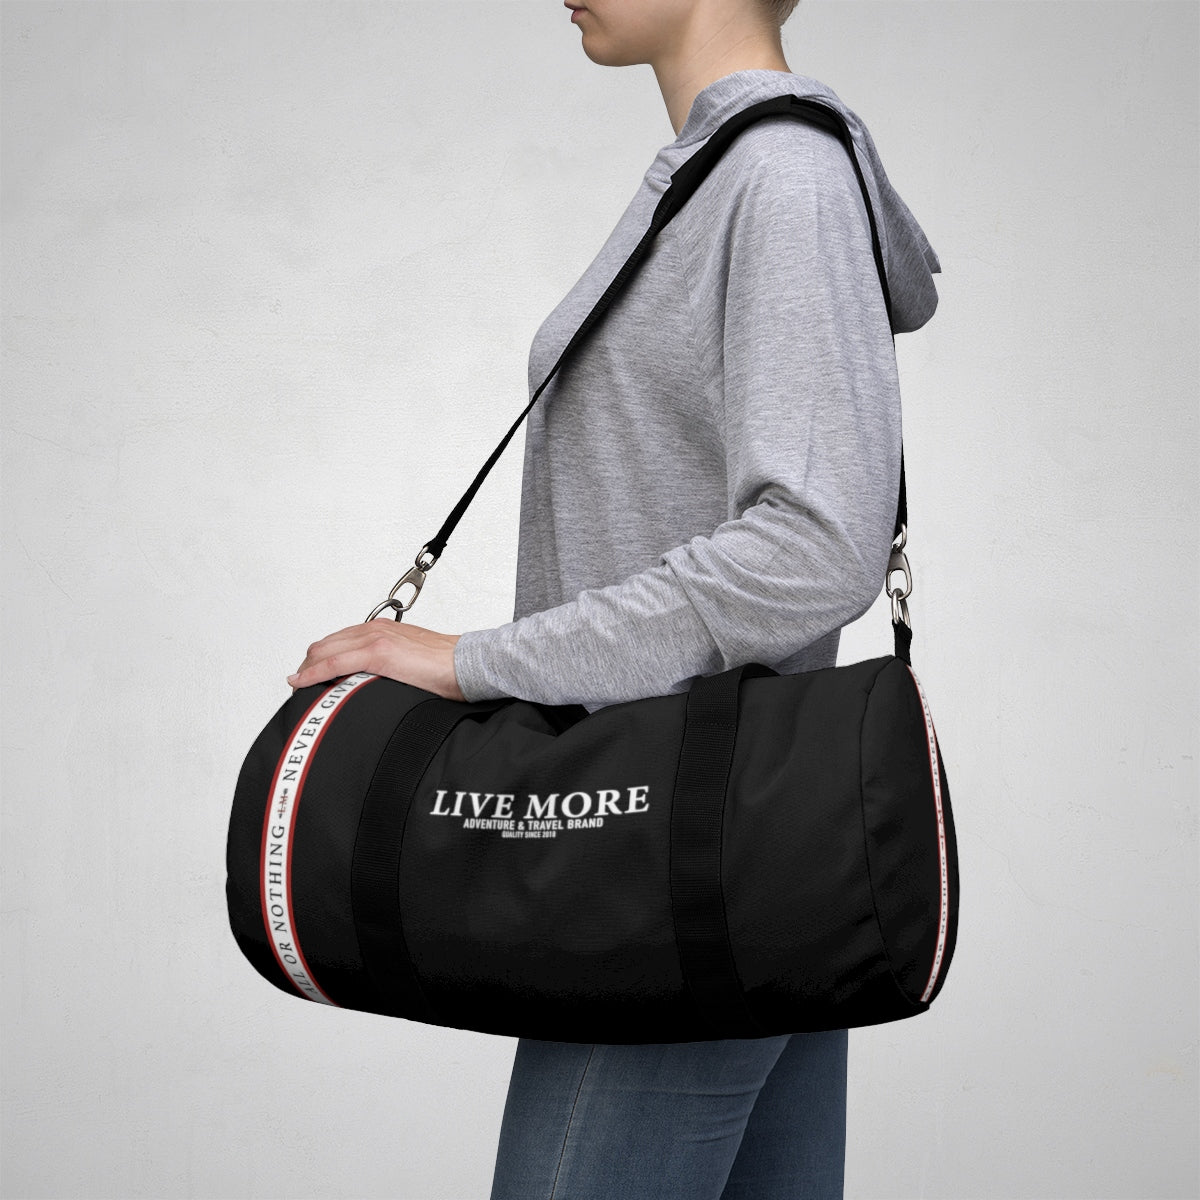 All Or Nothing Never Give Up Live More Duffle Bag - Live More